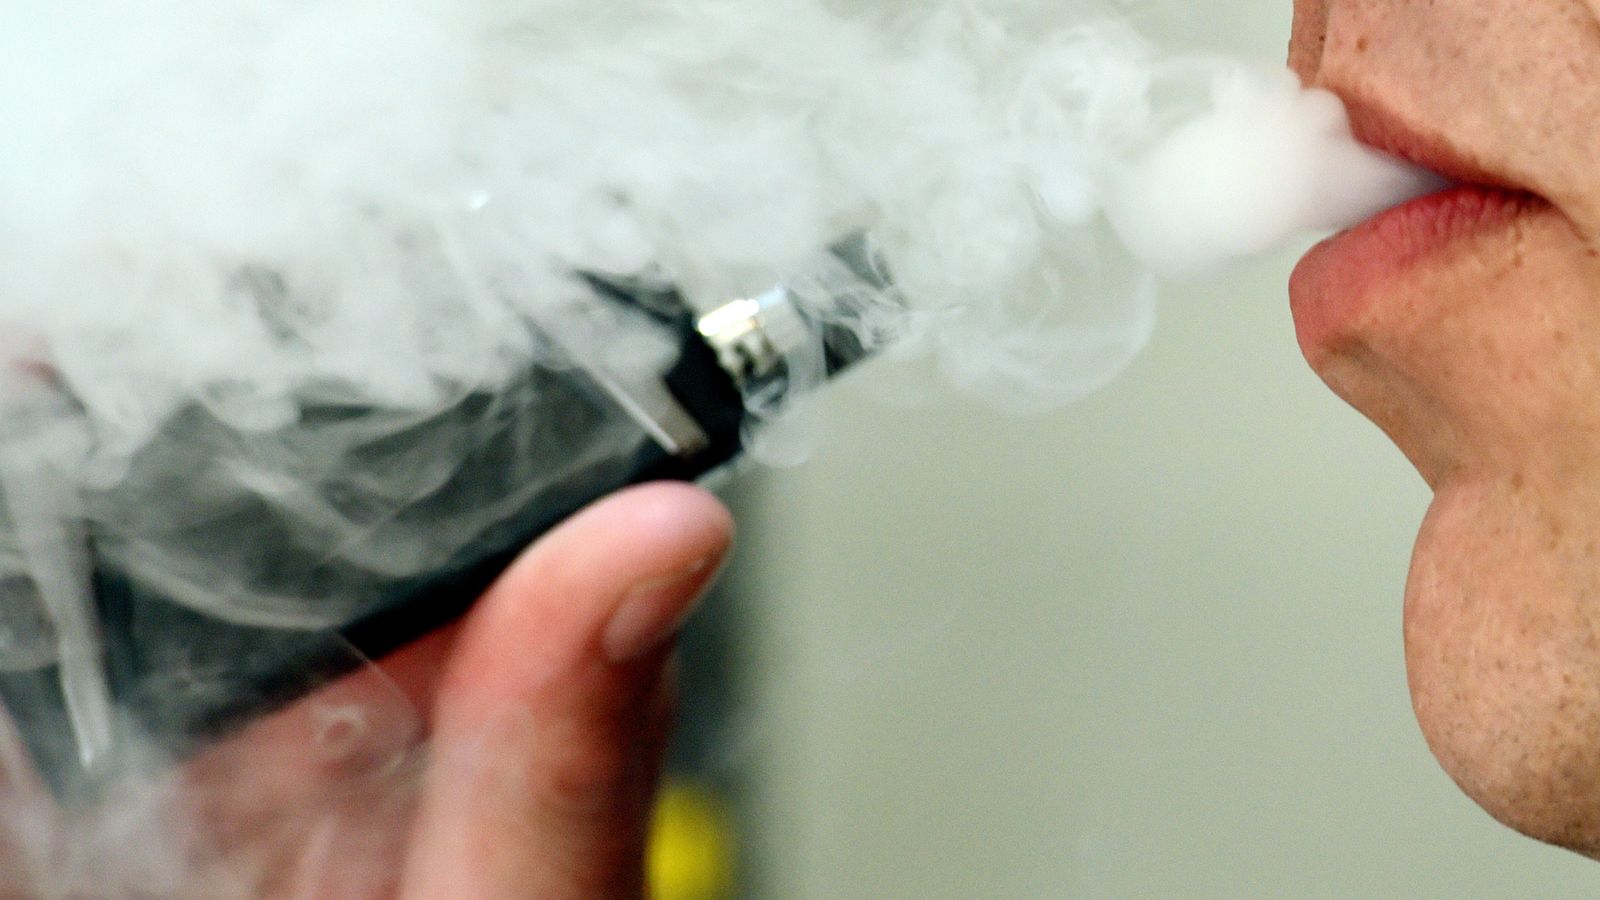 Councils calls for ‘inherently unsustainable’ single-use vapes to be banned by 2024